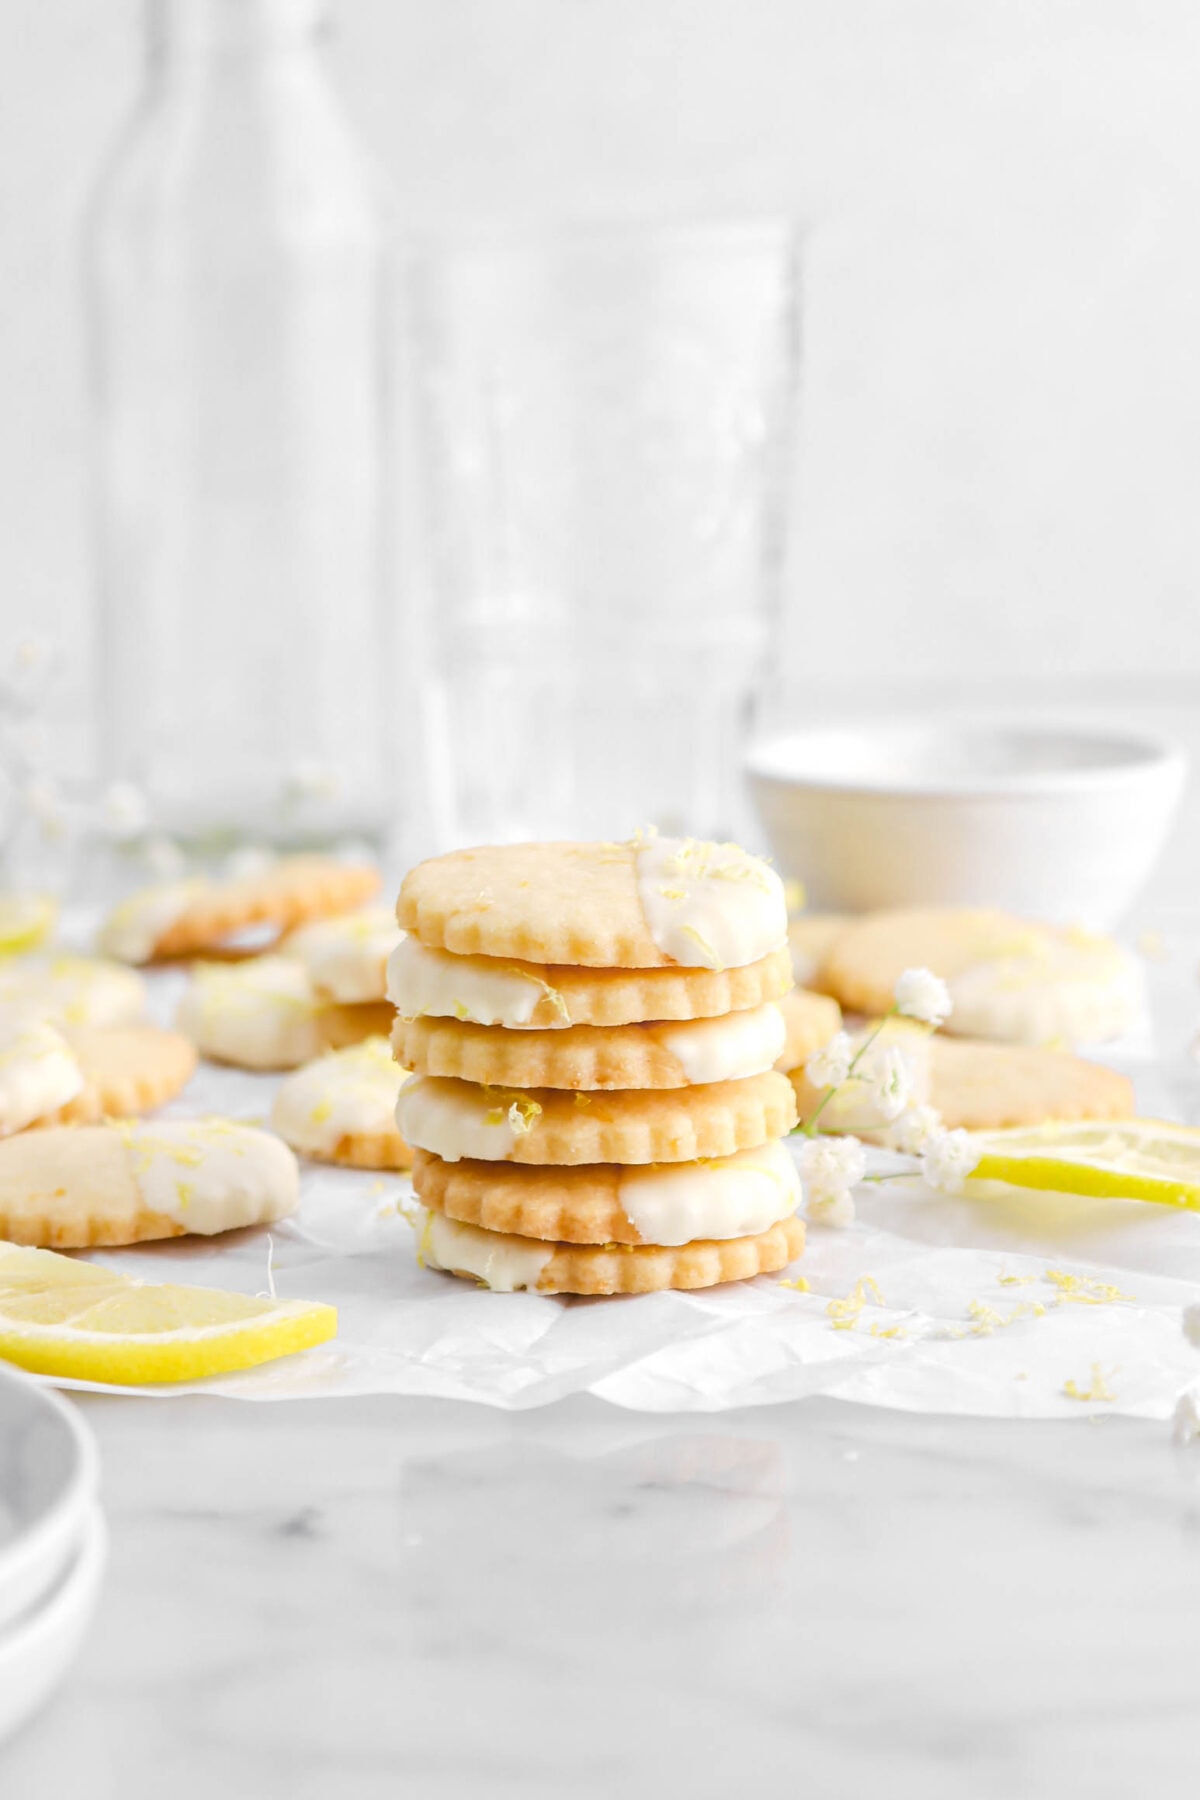 stacked lemon shortbread cookies on parchment paper with more cookies behind.